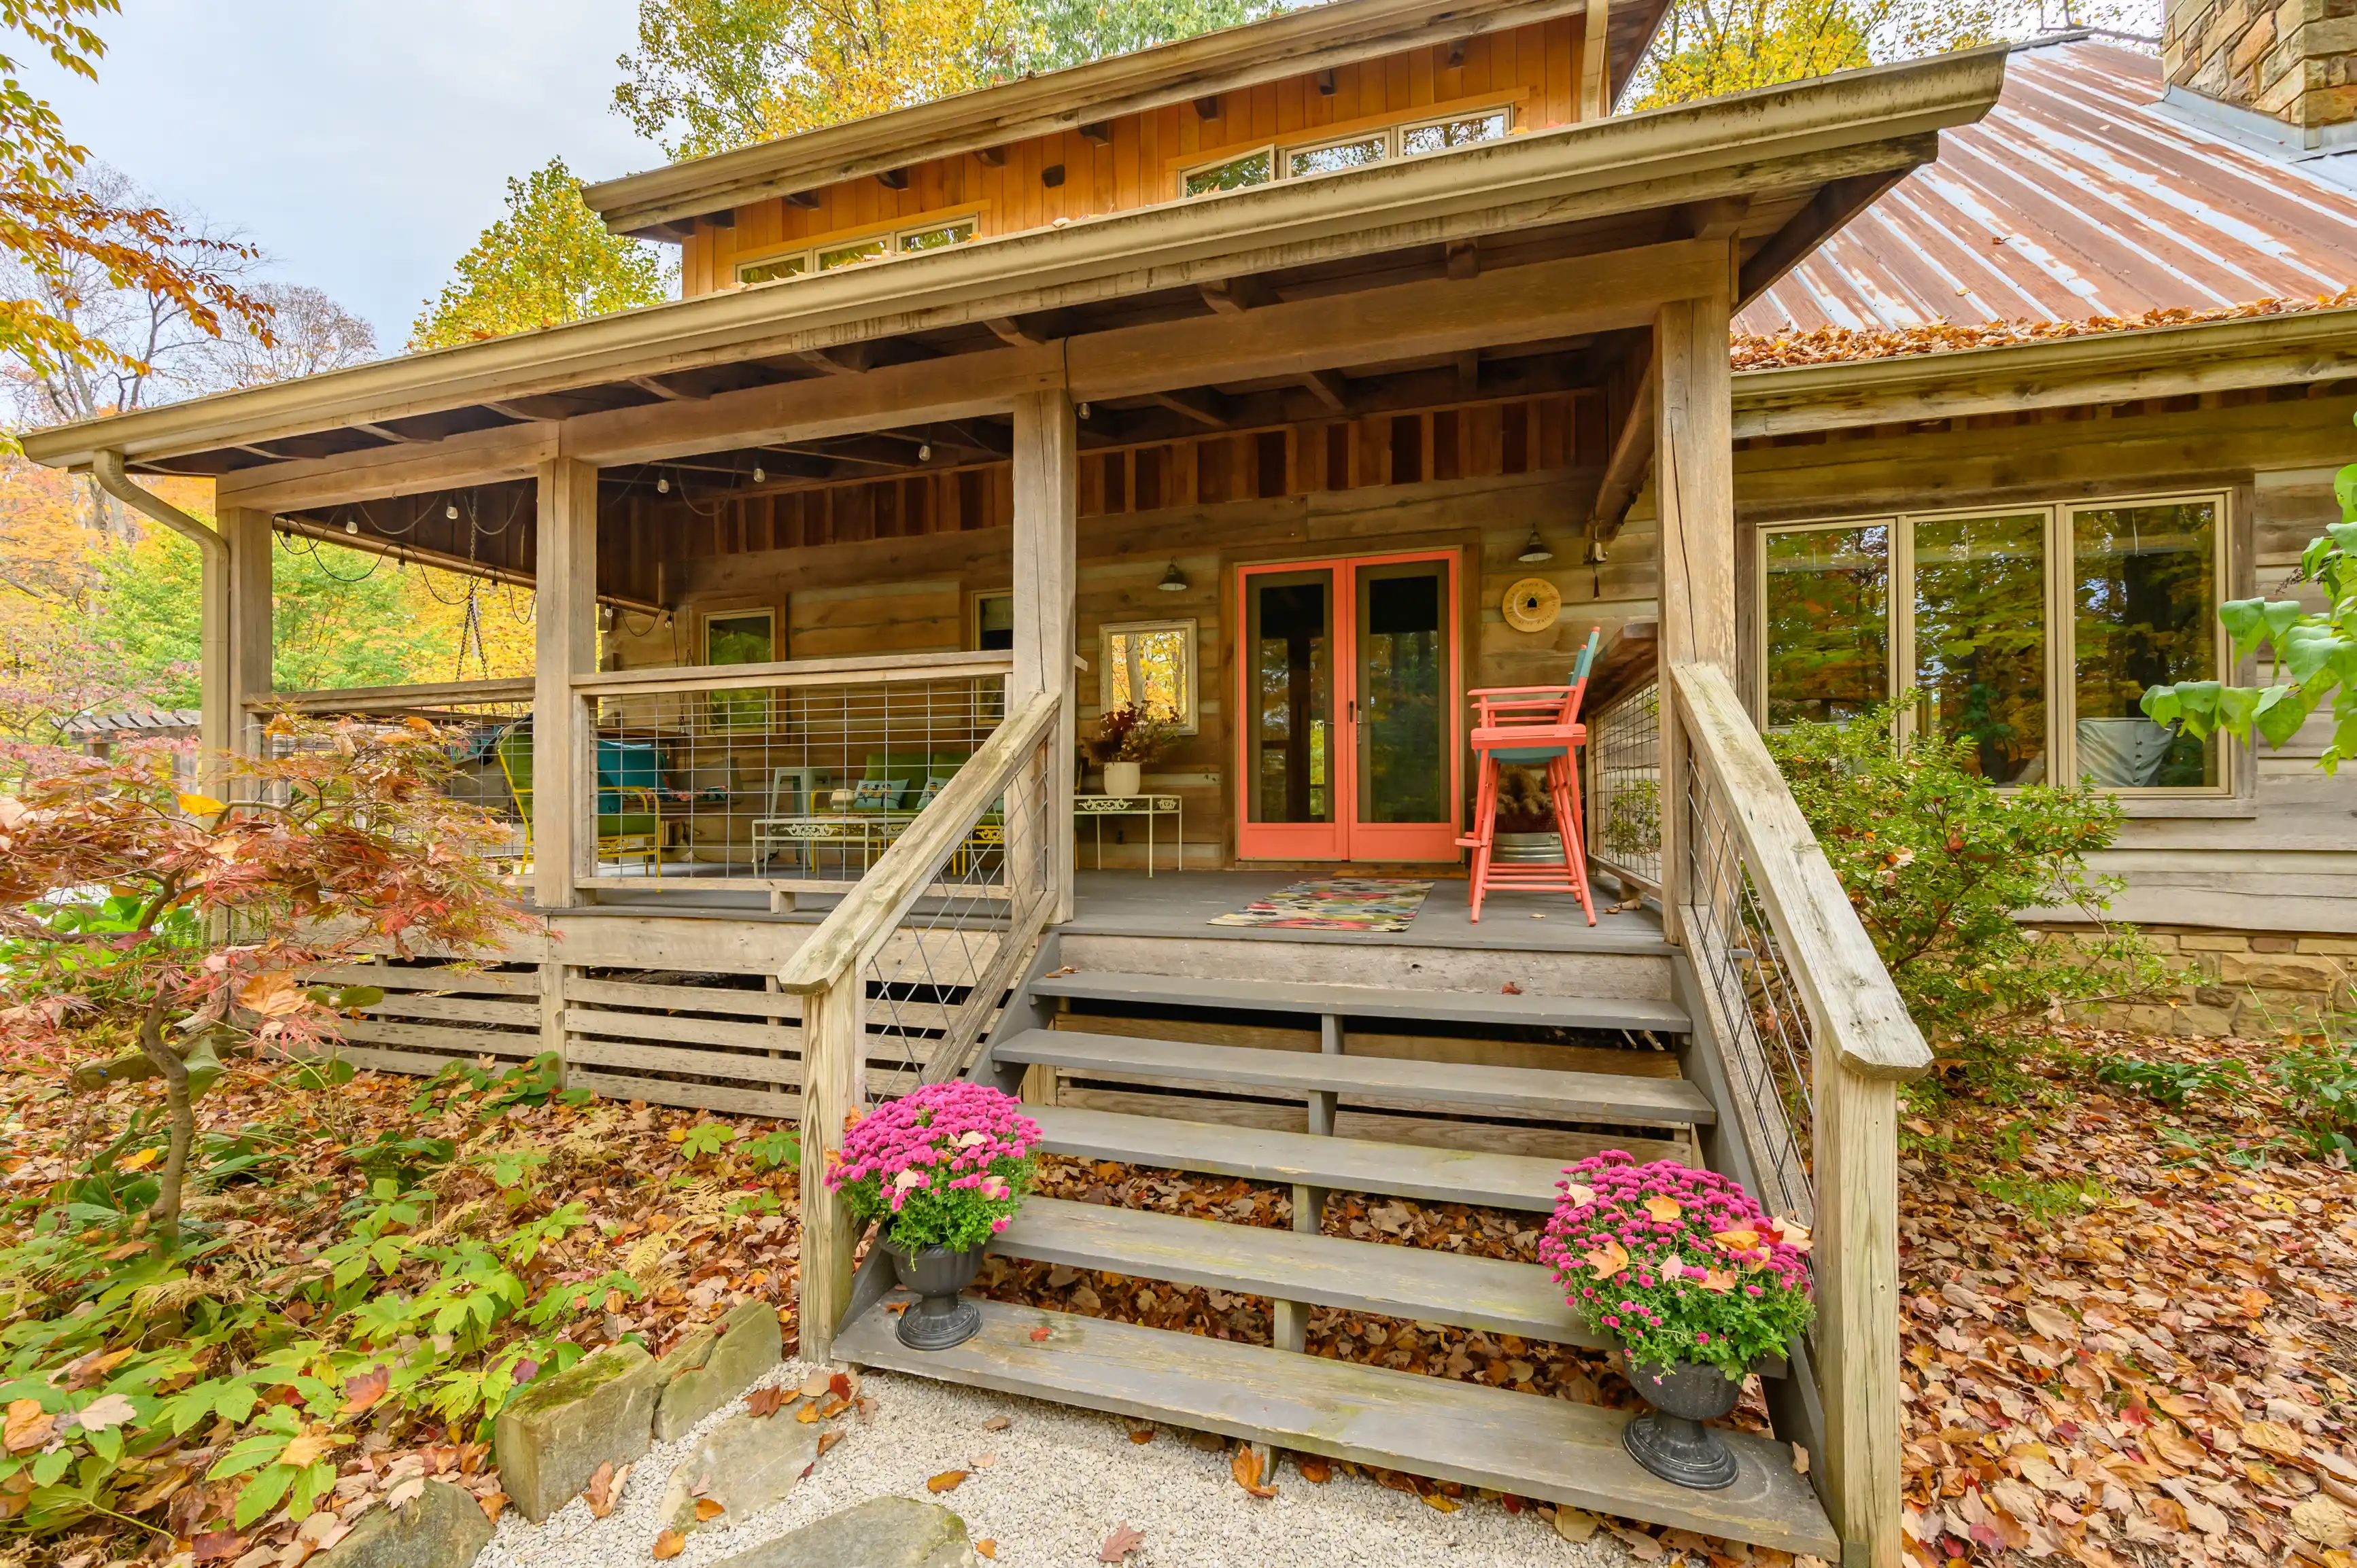 Rustic wooden cabin with a covered porch, red door, and autumn foliage.